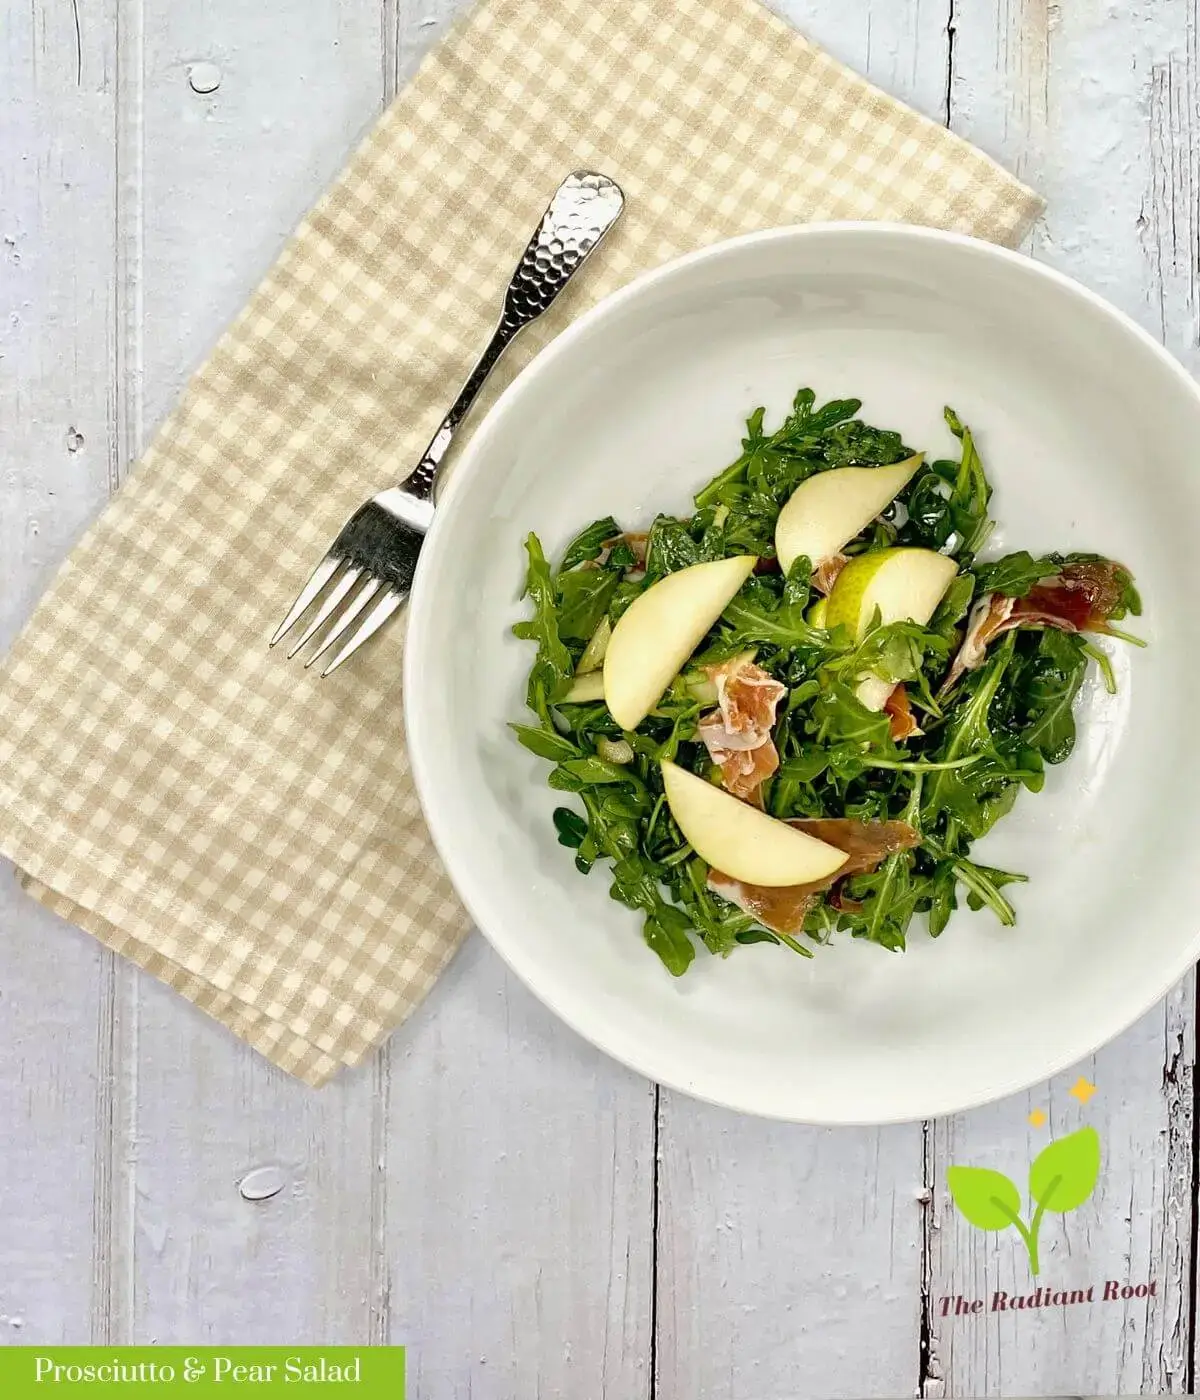 A white wooden table with a brown and white checkered dish towel with a fork on top next to a large white salad bowl containing a pear, arugula, and prosciutto salad with the words "Prosciutto & Pear Salad" in white font with a green highlighting behind it. | Proscuitto Salad | The Radiant Root